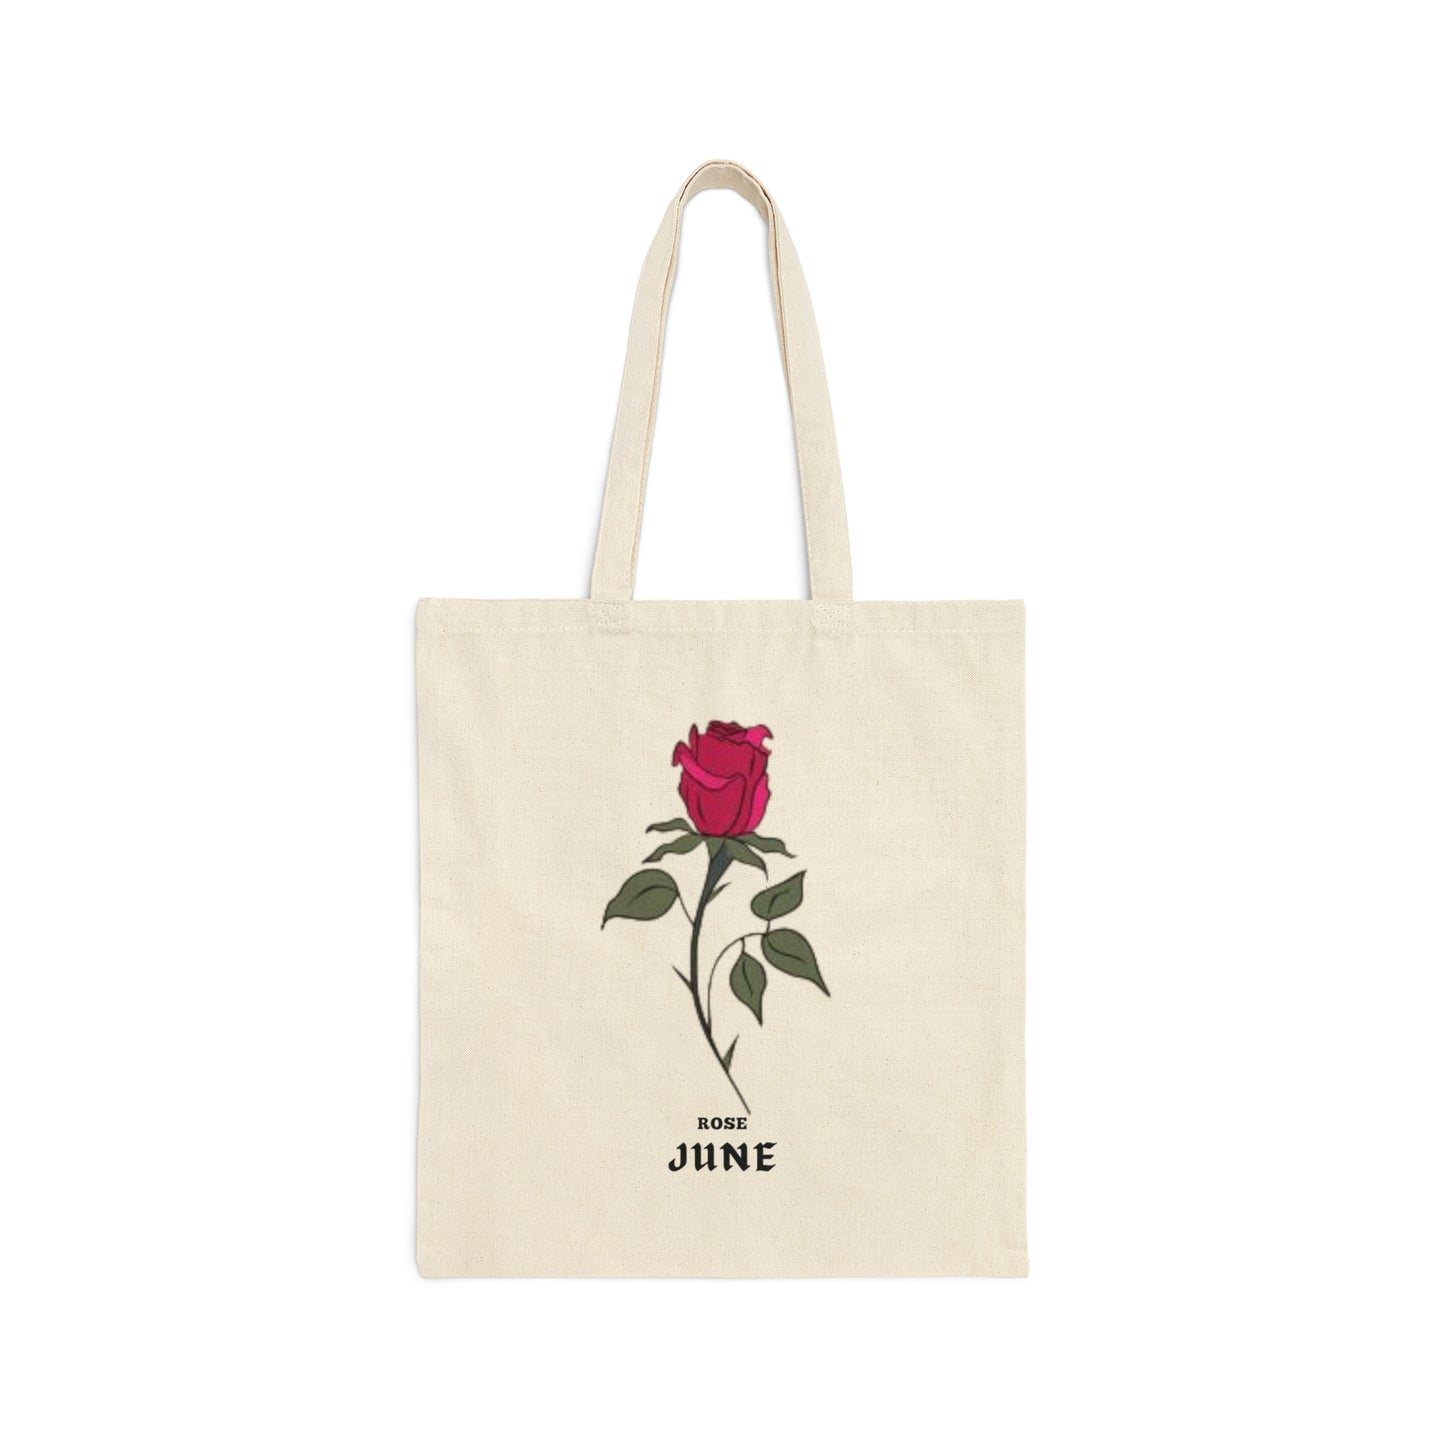 JUNE BIRTH MONTH FLOWER TOTE GIFT (ROSE)